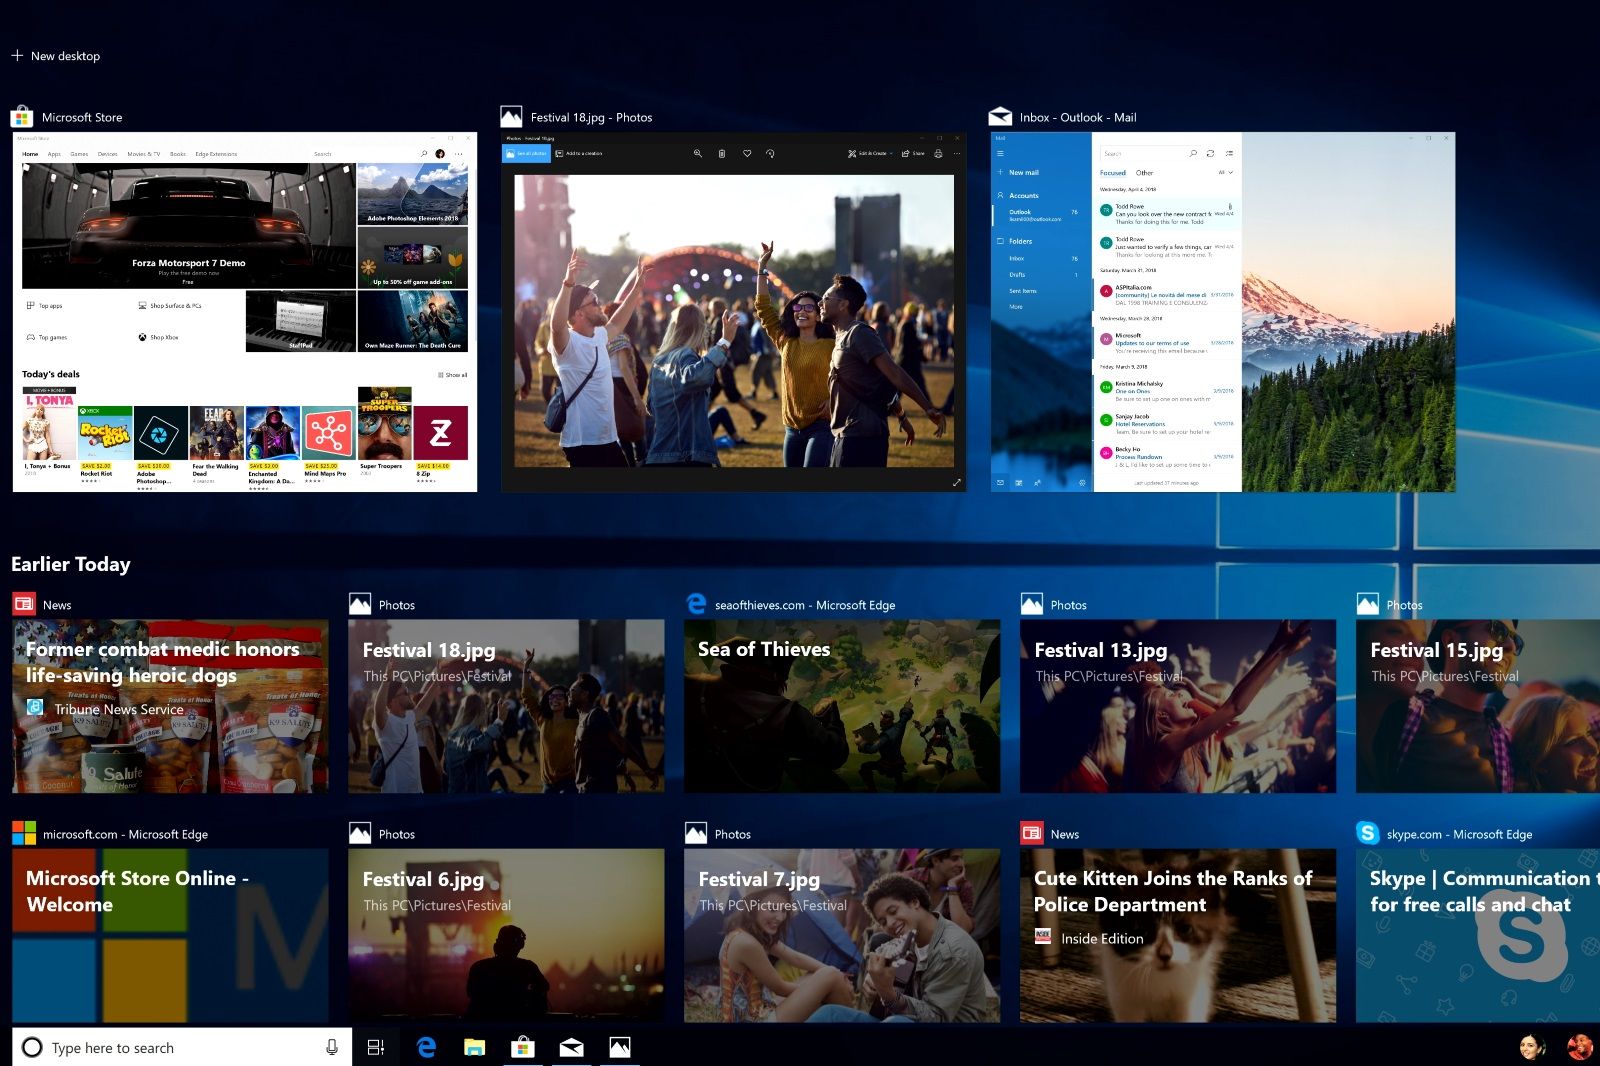 Windows 10 Spring Update What are the new Windows features image 1